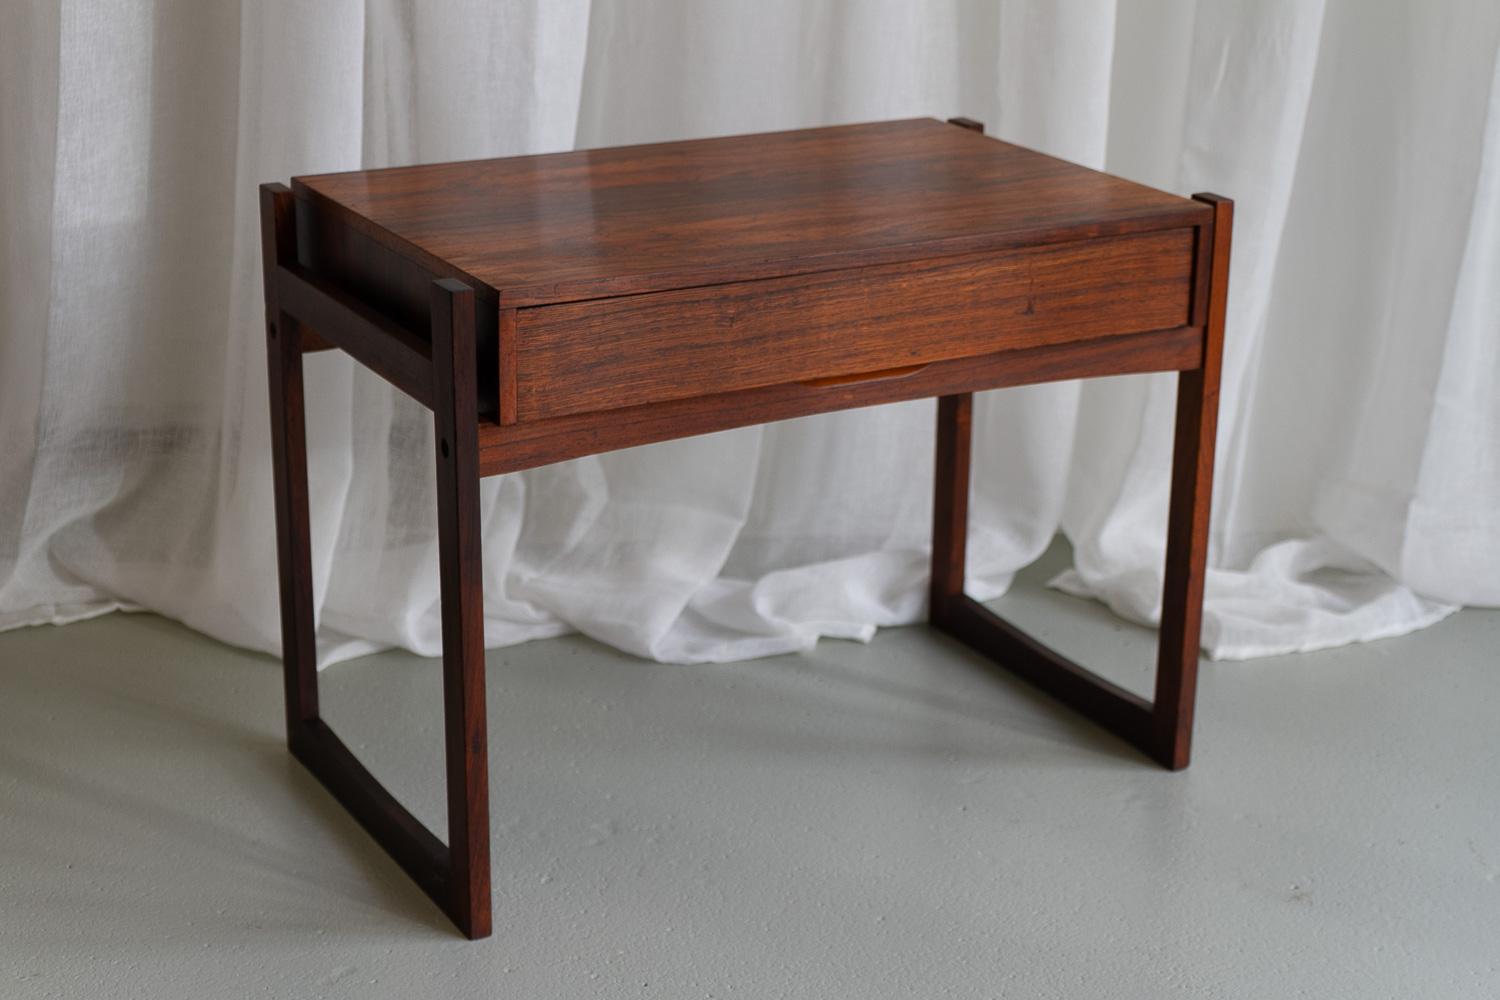 Danish Modern Rosewood Side Table with Drawer, 1960s.
Elegant and versatile Scandinavian Mid-Century Modern side table with sleigh legs and drawer. Drawer front sits flush with the edge and is thus concealed. This adds to the sleek and elegant